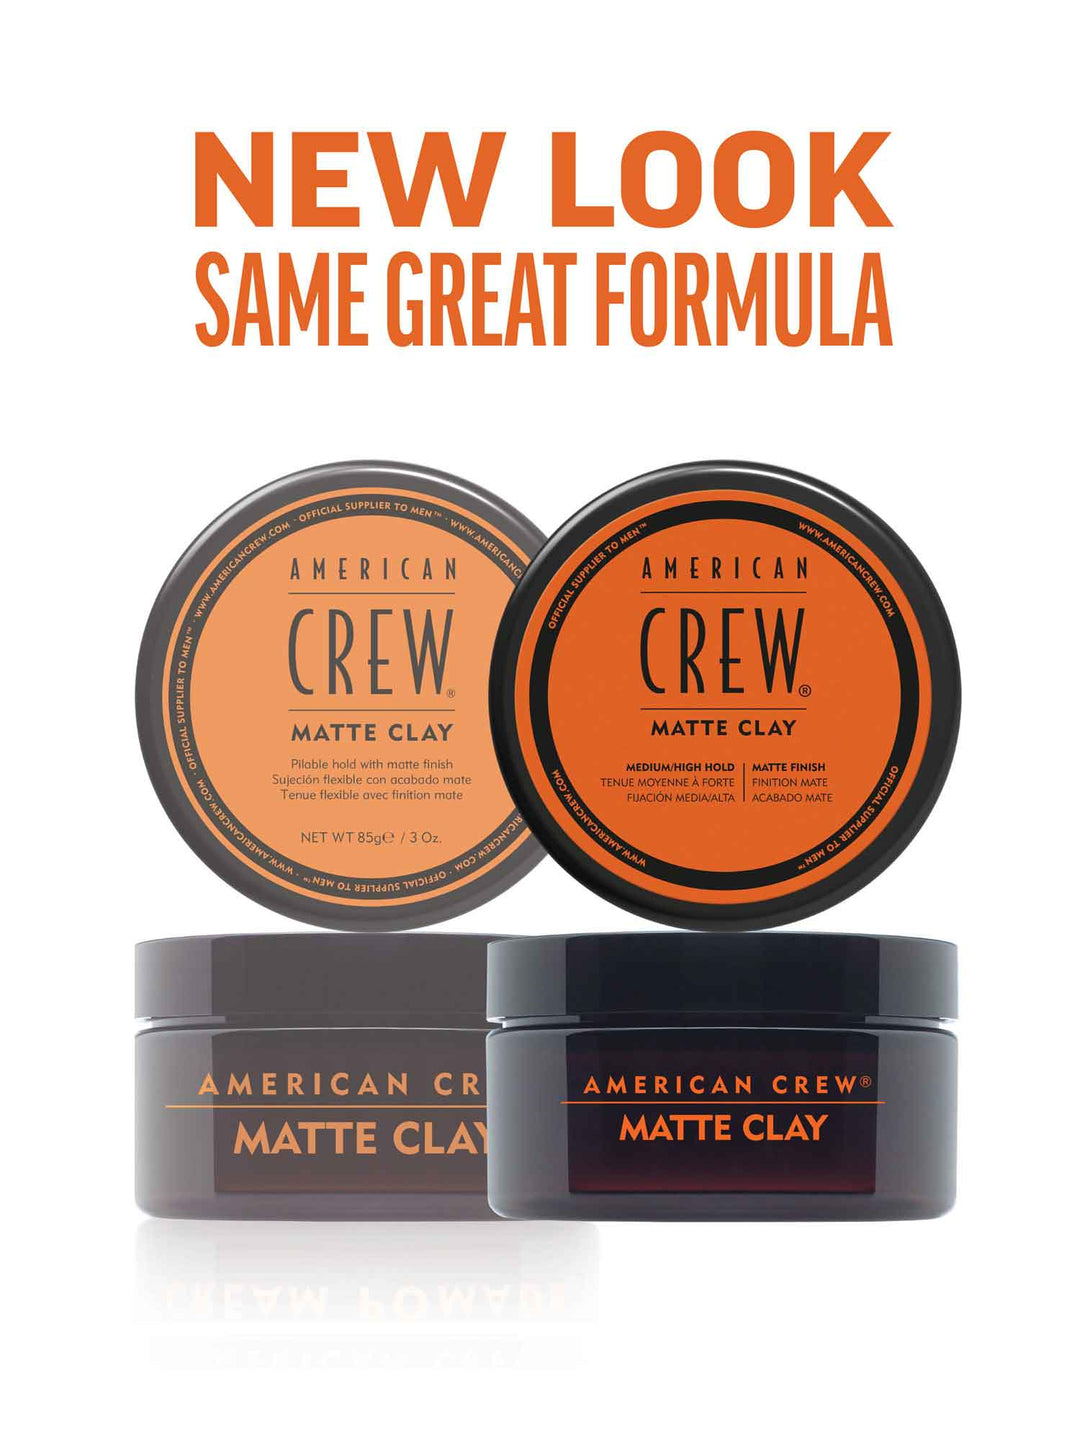 Matte Clay styling puck. New look, same great formula